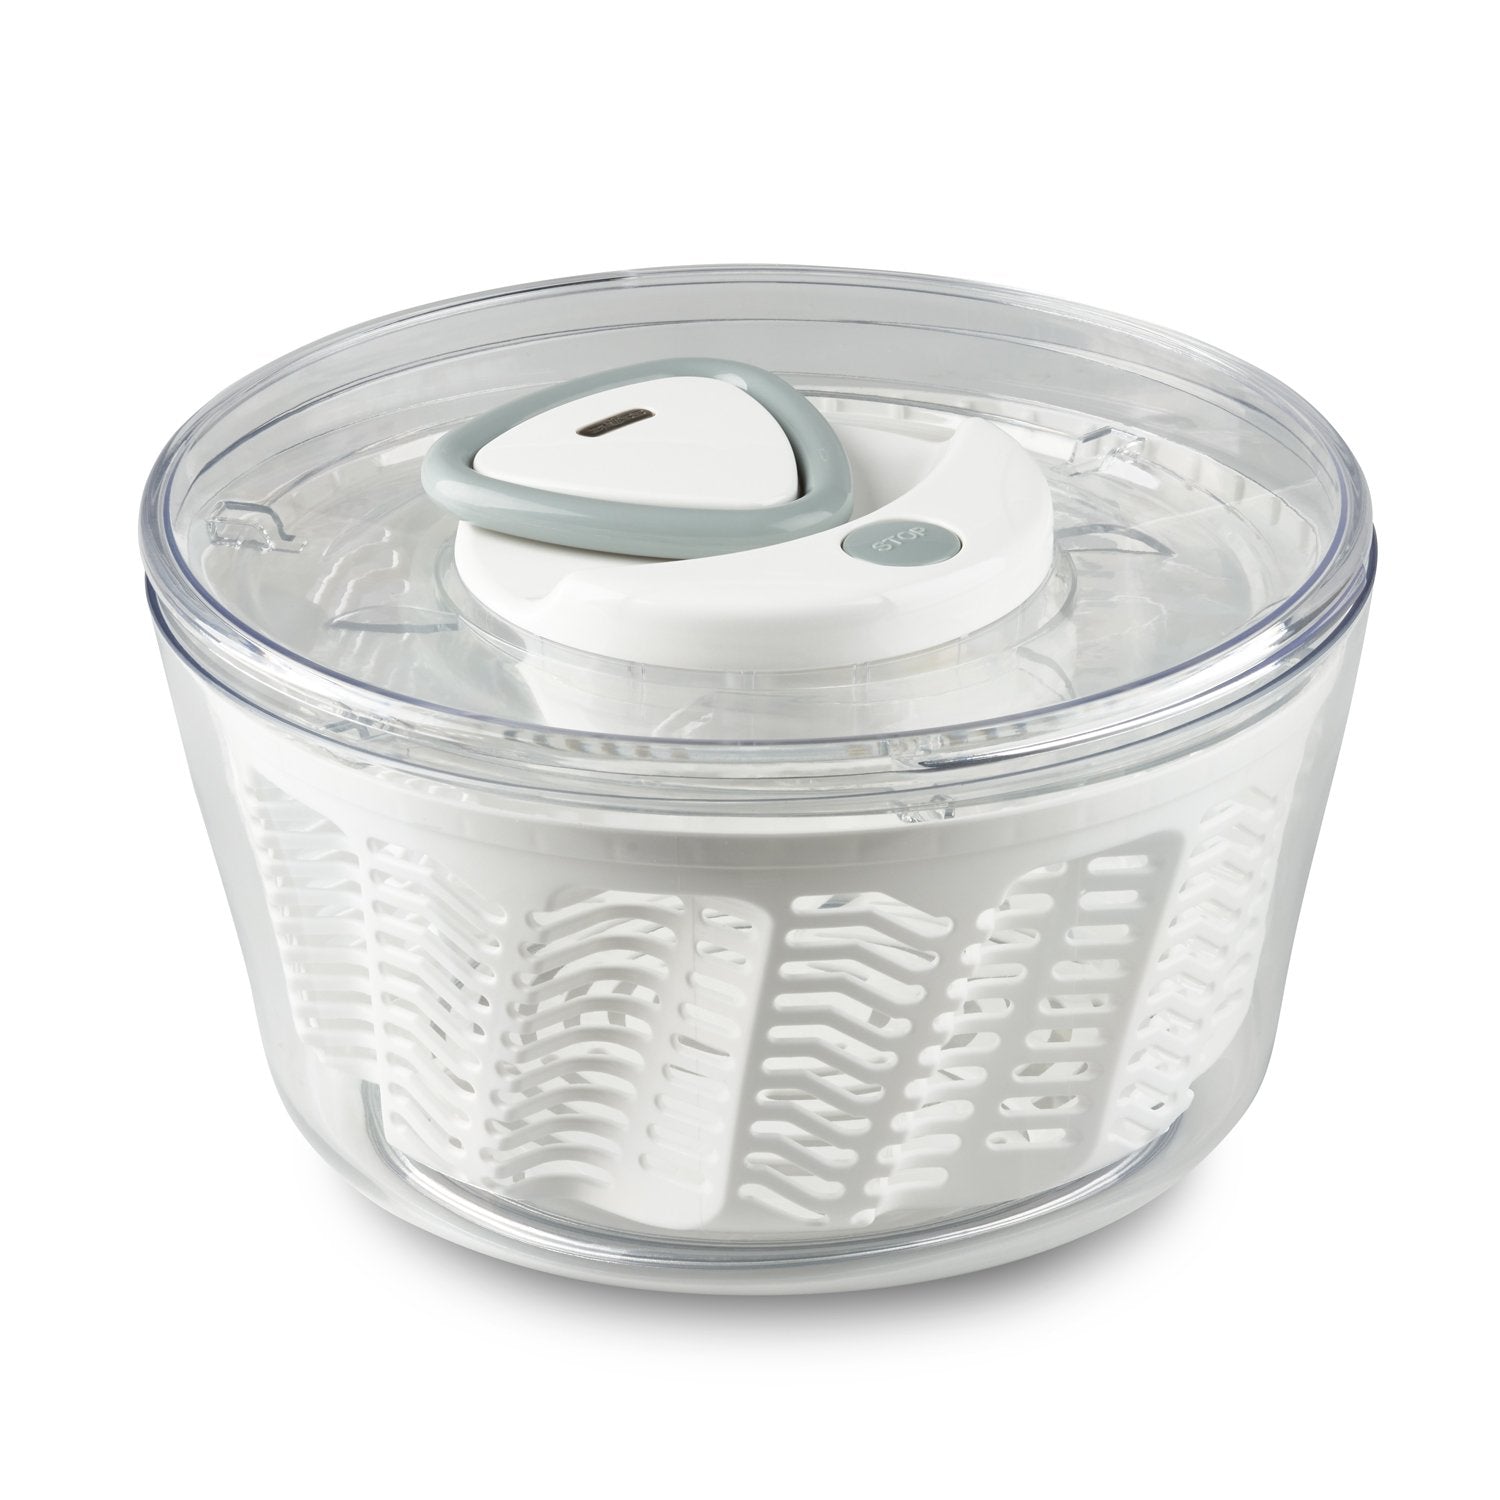 Zyliss Easy Spin 2 AquaVent Large Salad Spinner with Pull Cord